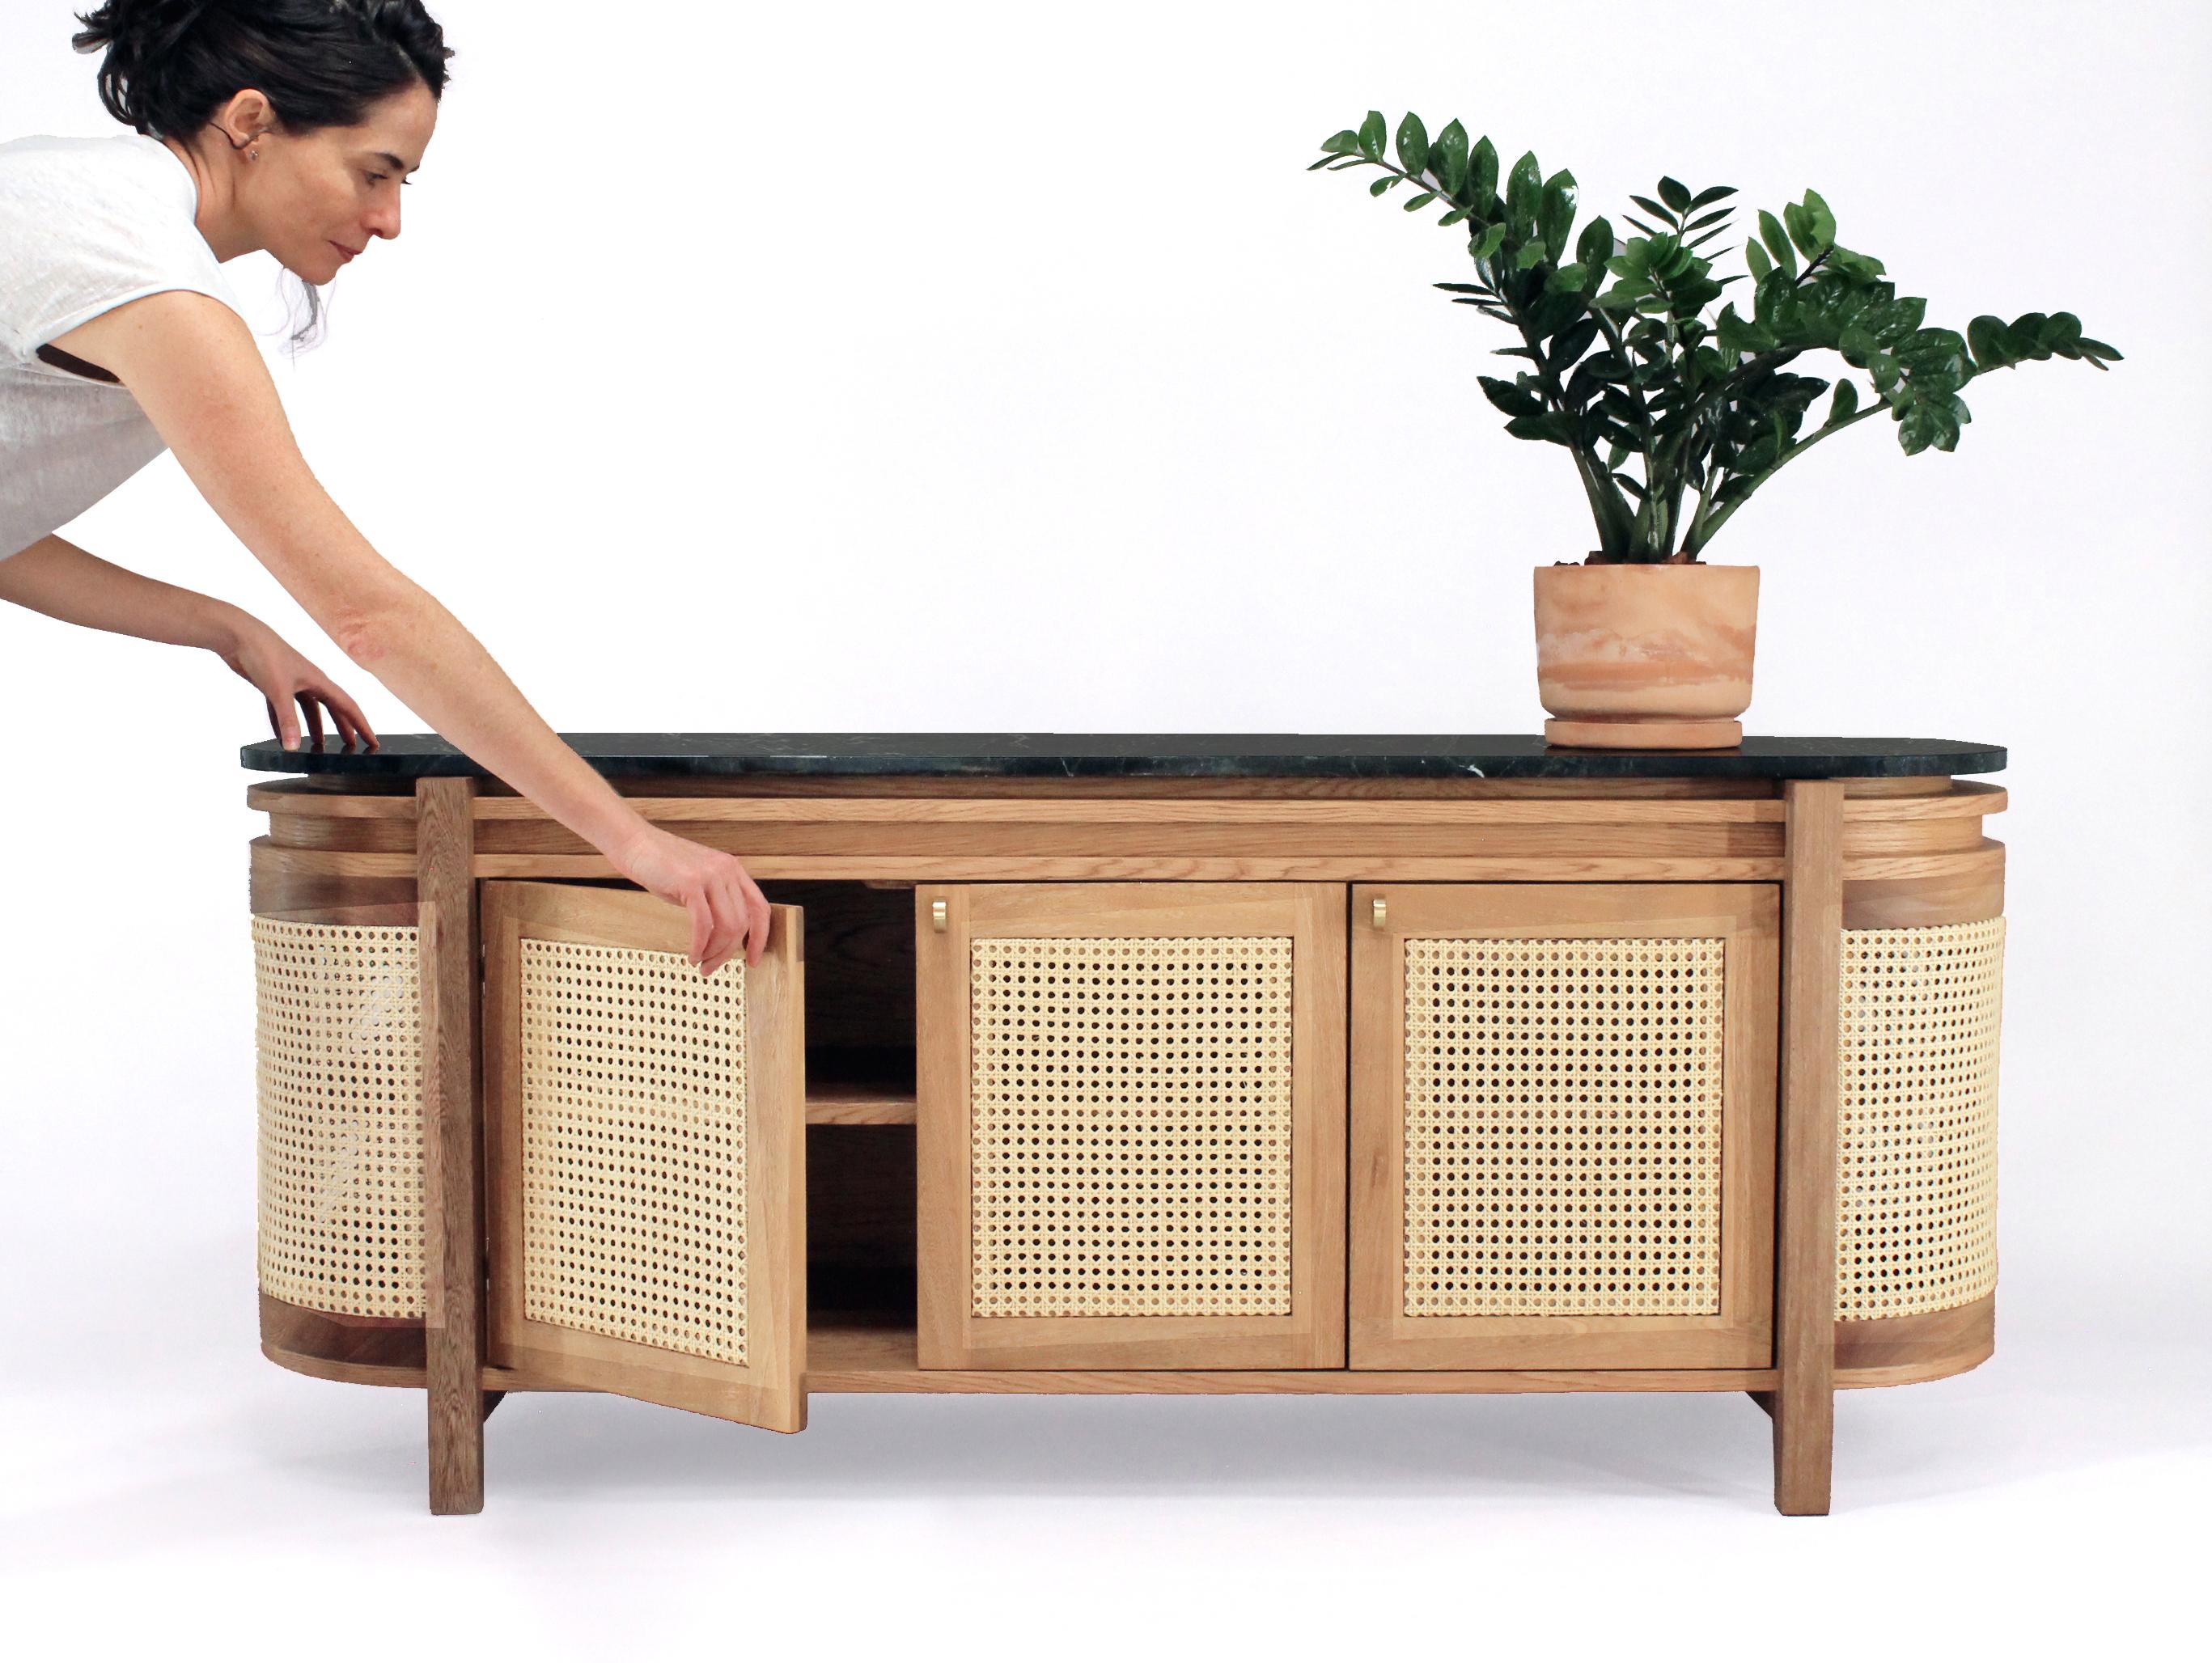 Av. Mexico Sideboard, Wicker and Oak with Marble, Mexican Design 160 cm In New Condition For Sale In Mexico City, MX